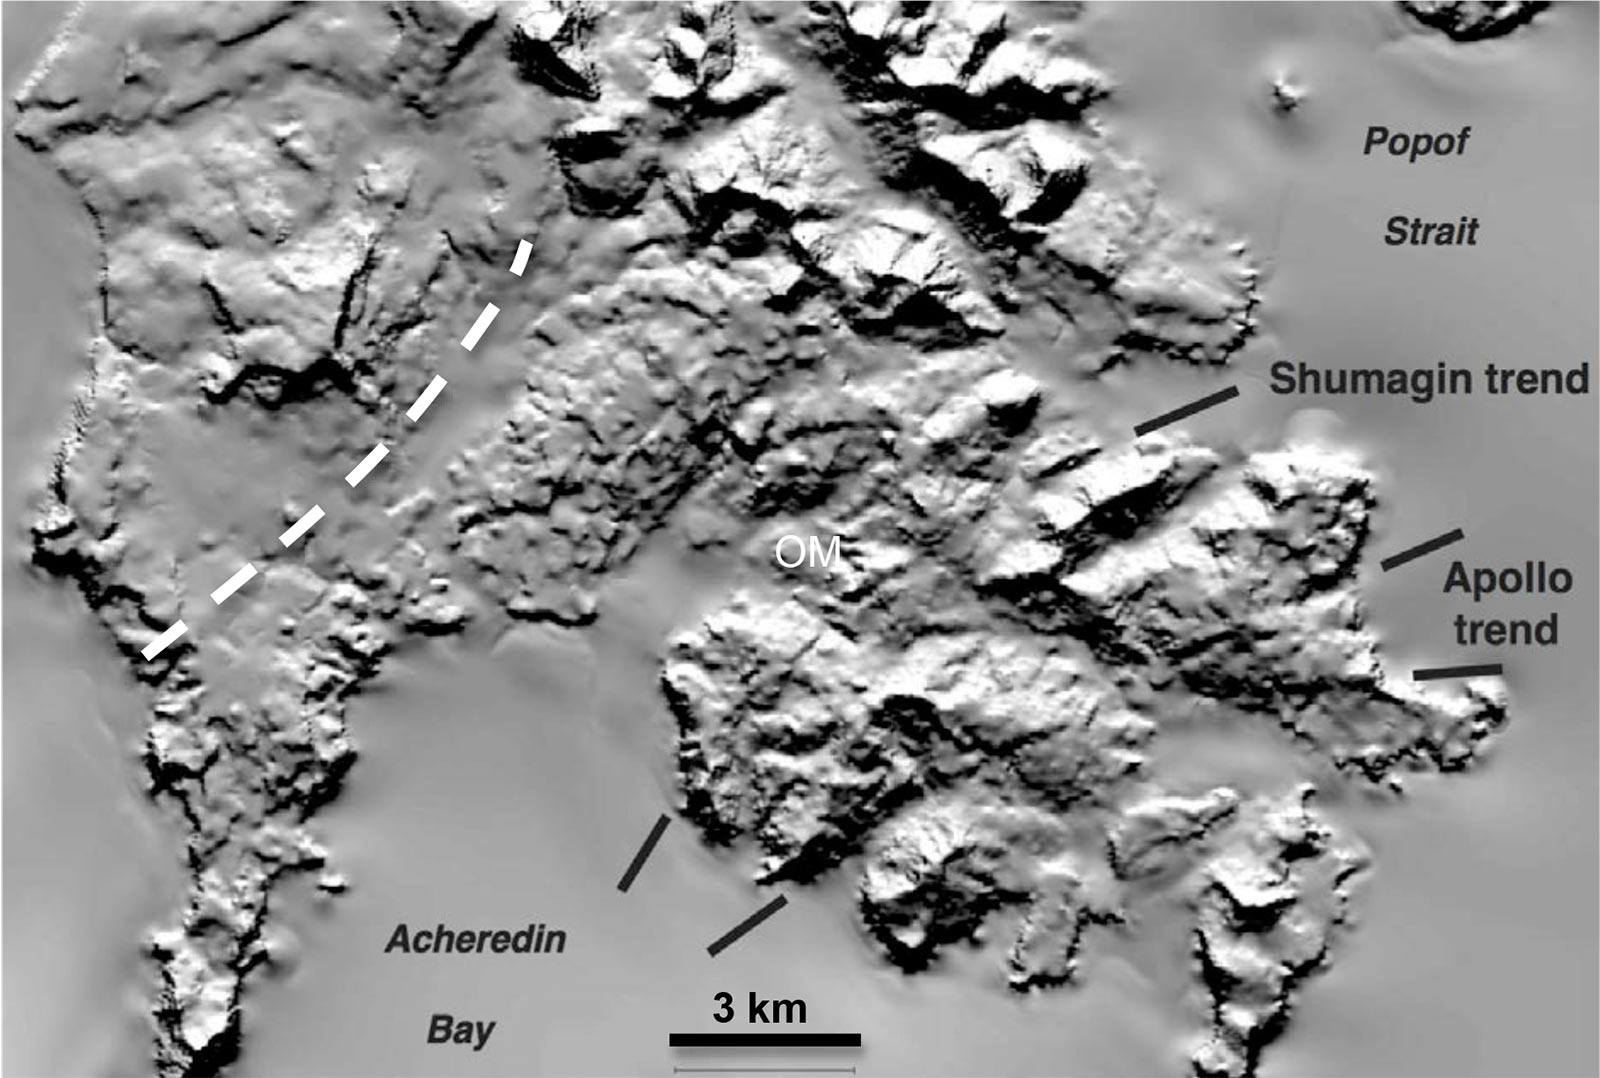 Shaded relief of southern Unga Island showing the strong NE-SW structural features that cut the SE portion of the island, and which are altered and mineralized (the Shumagin and Apollo trends).